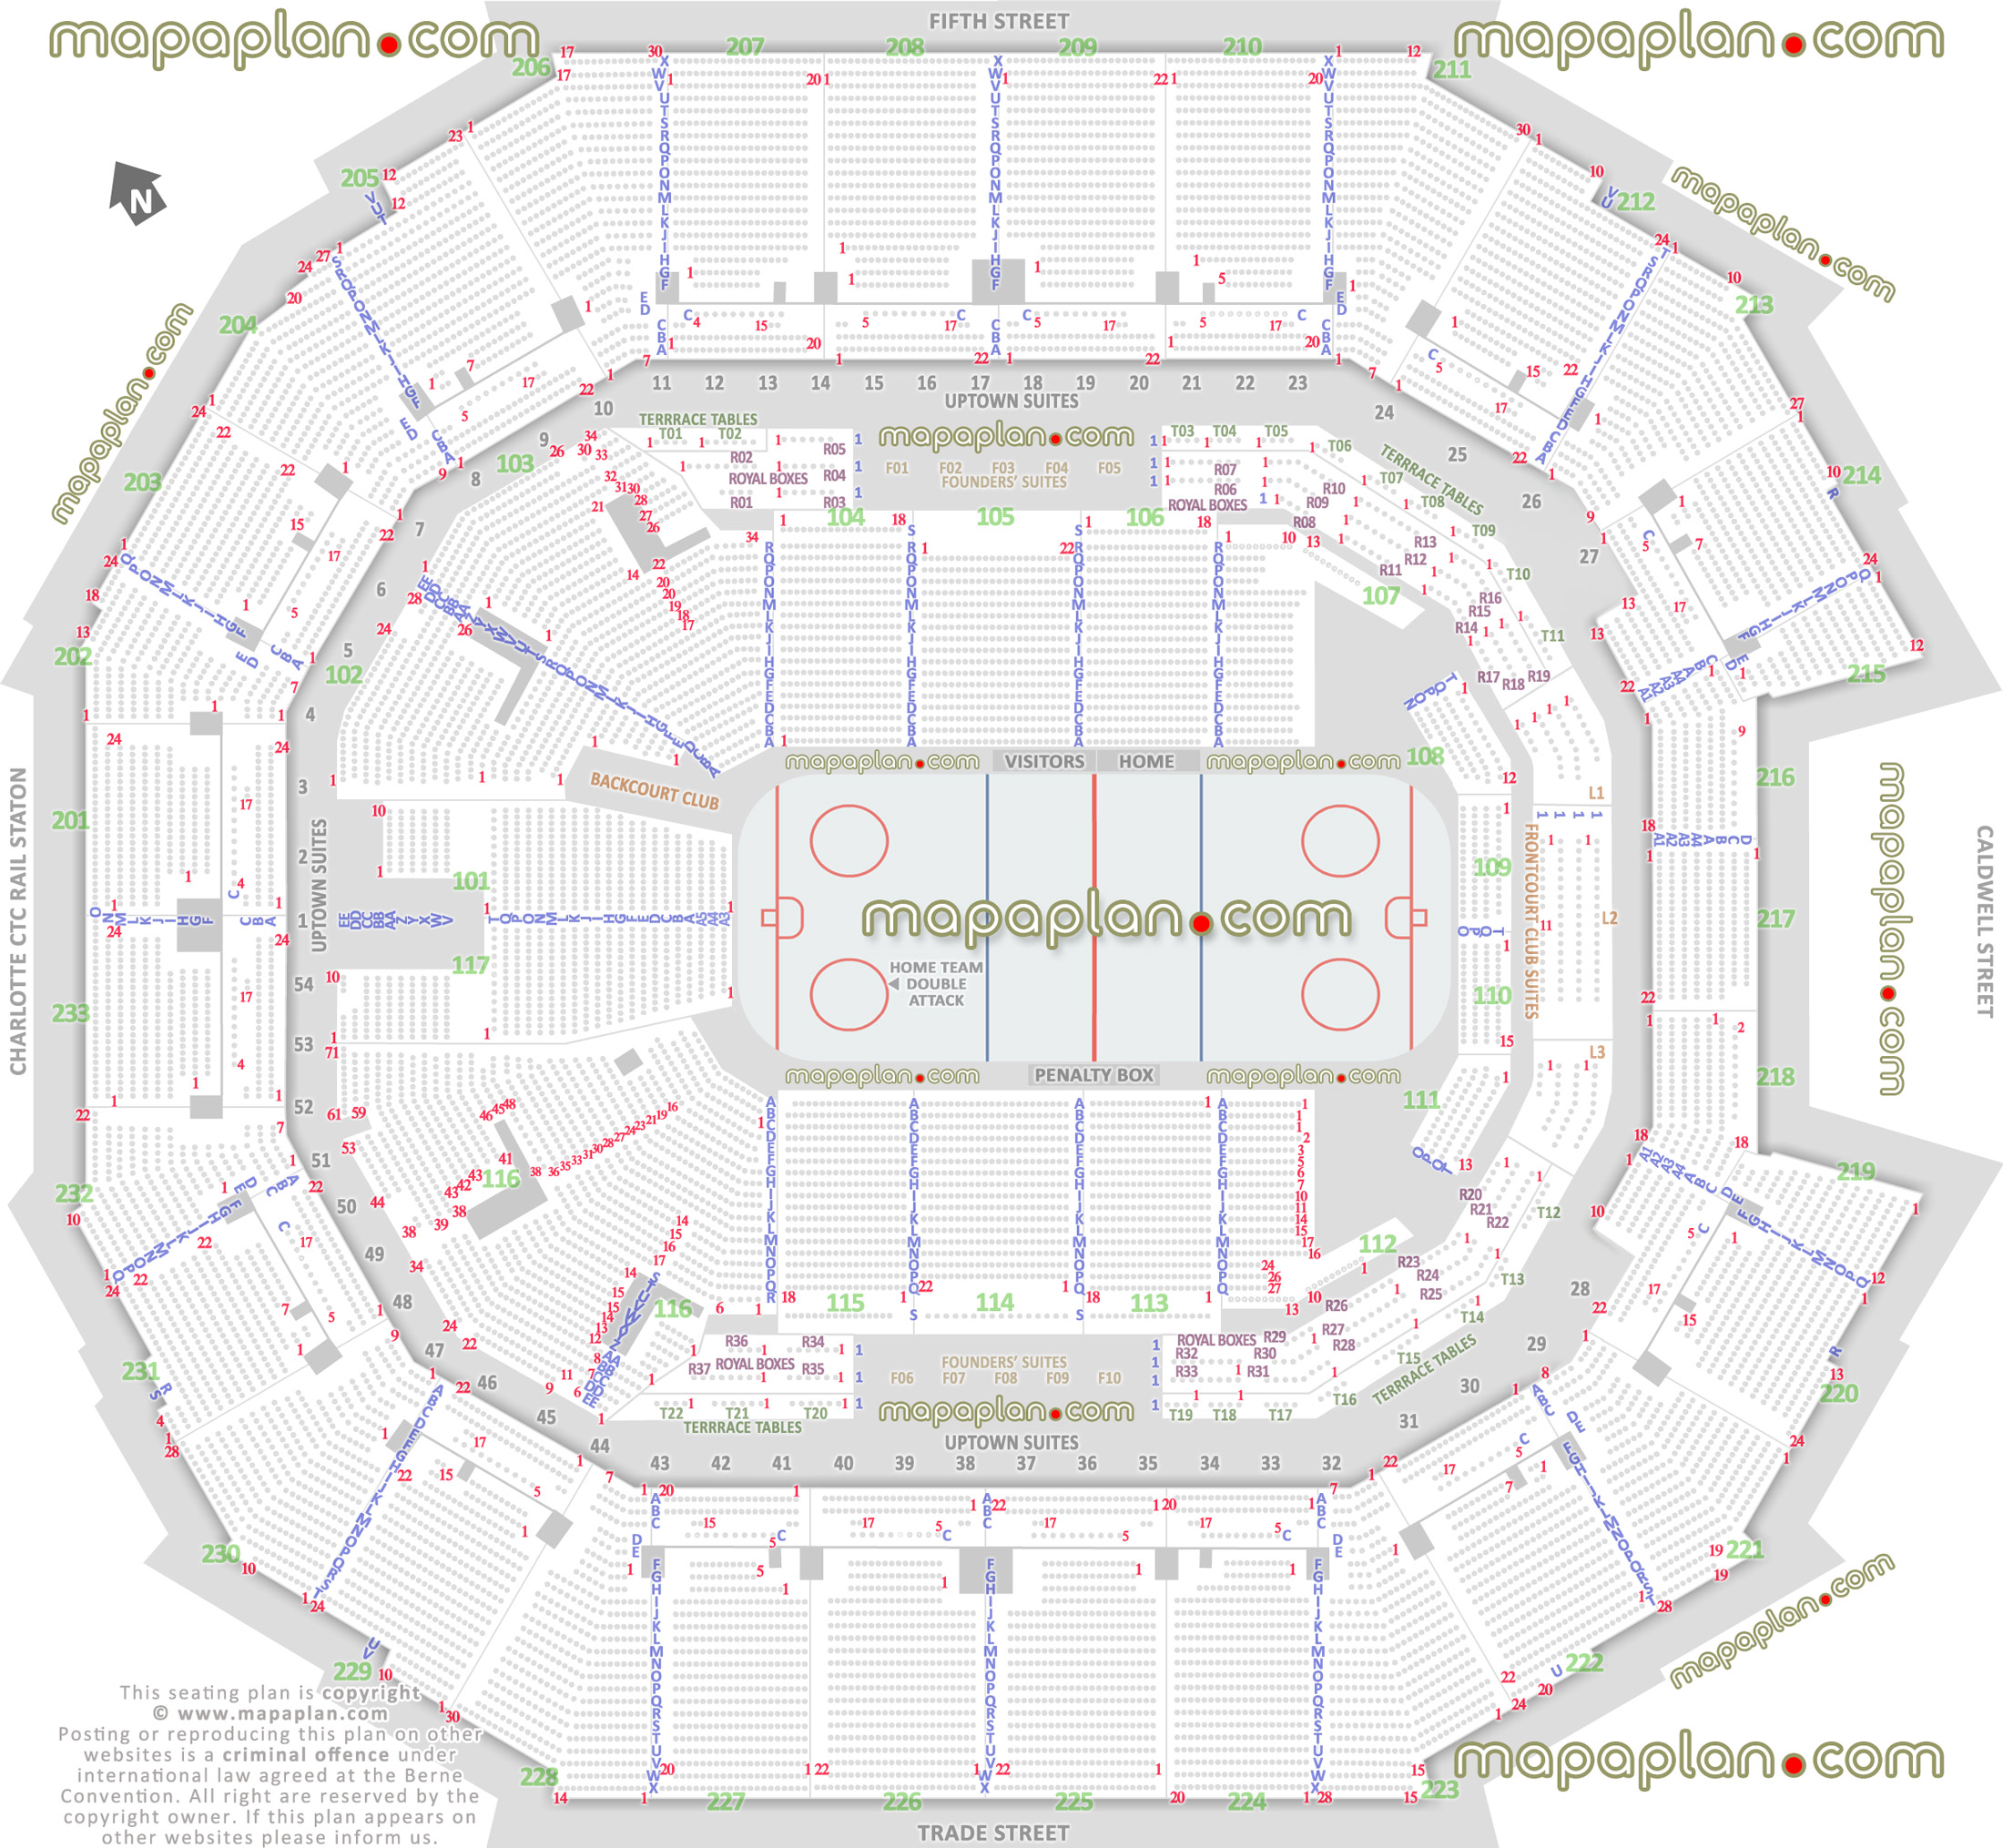 ice hockey arena seating capacity arrangement diagram time warner center arena north carolina interactive virtual 3d detailed layout glass rinkside lower upper level stadium bowl sections full exact row numbers plan seats lower upper level Charlotte Spectrum Center seating chart